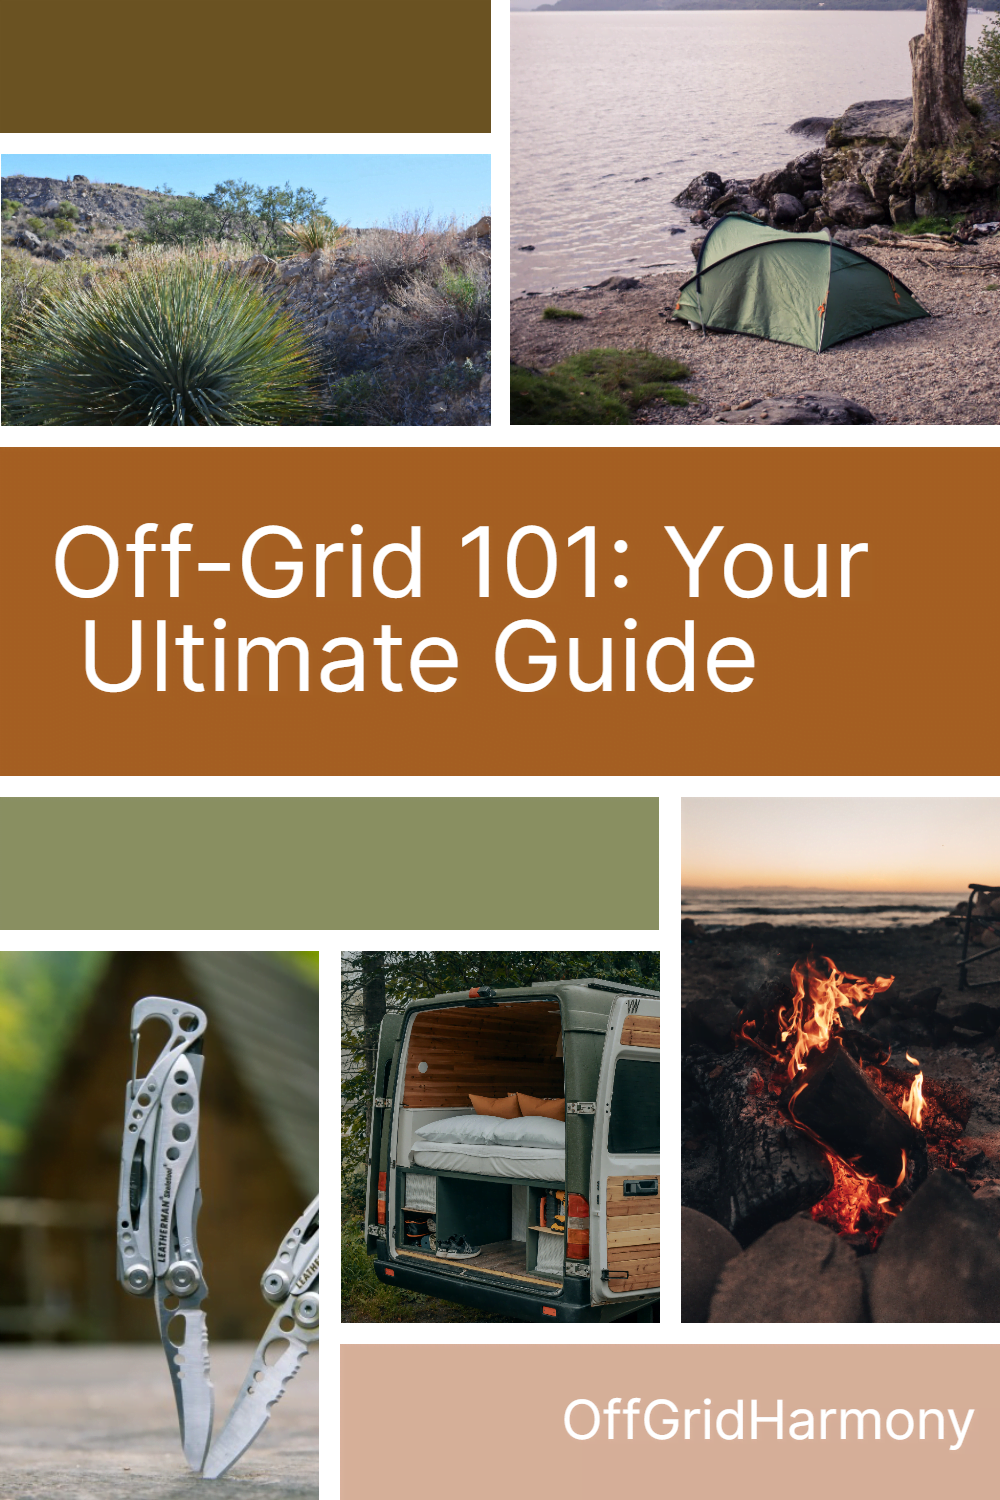 A grid with camping gear and fireplaces